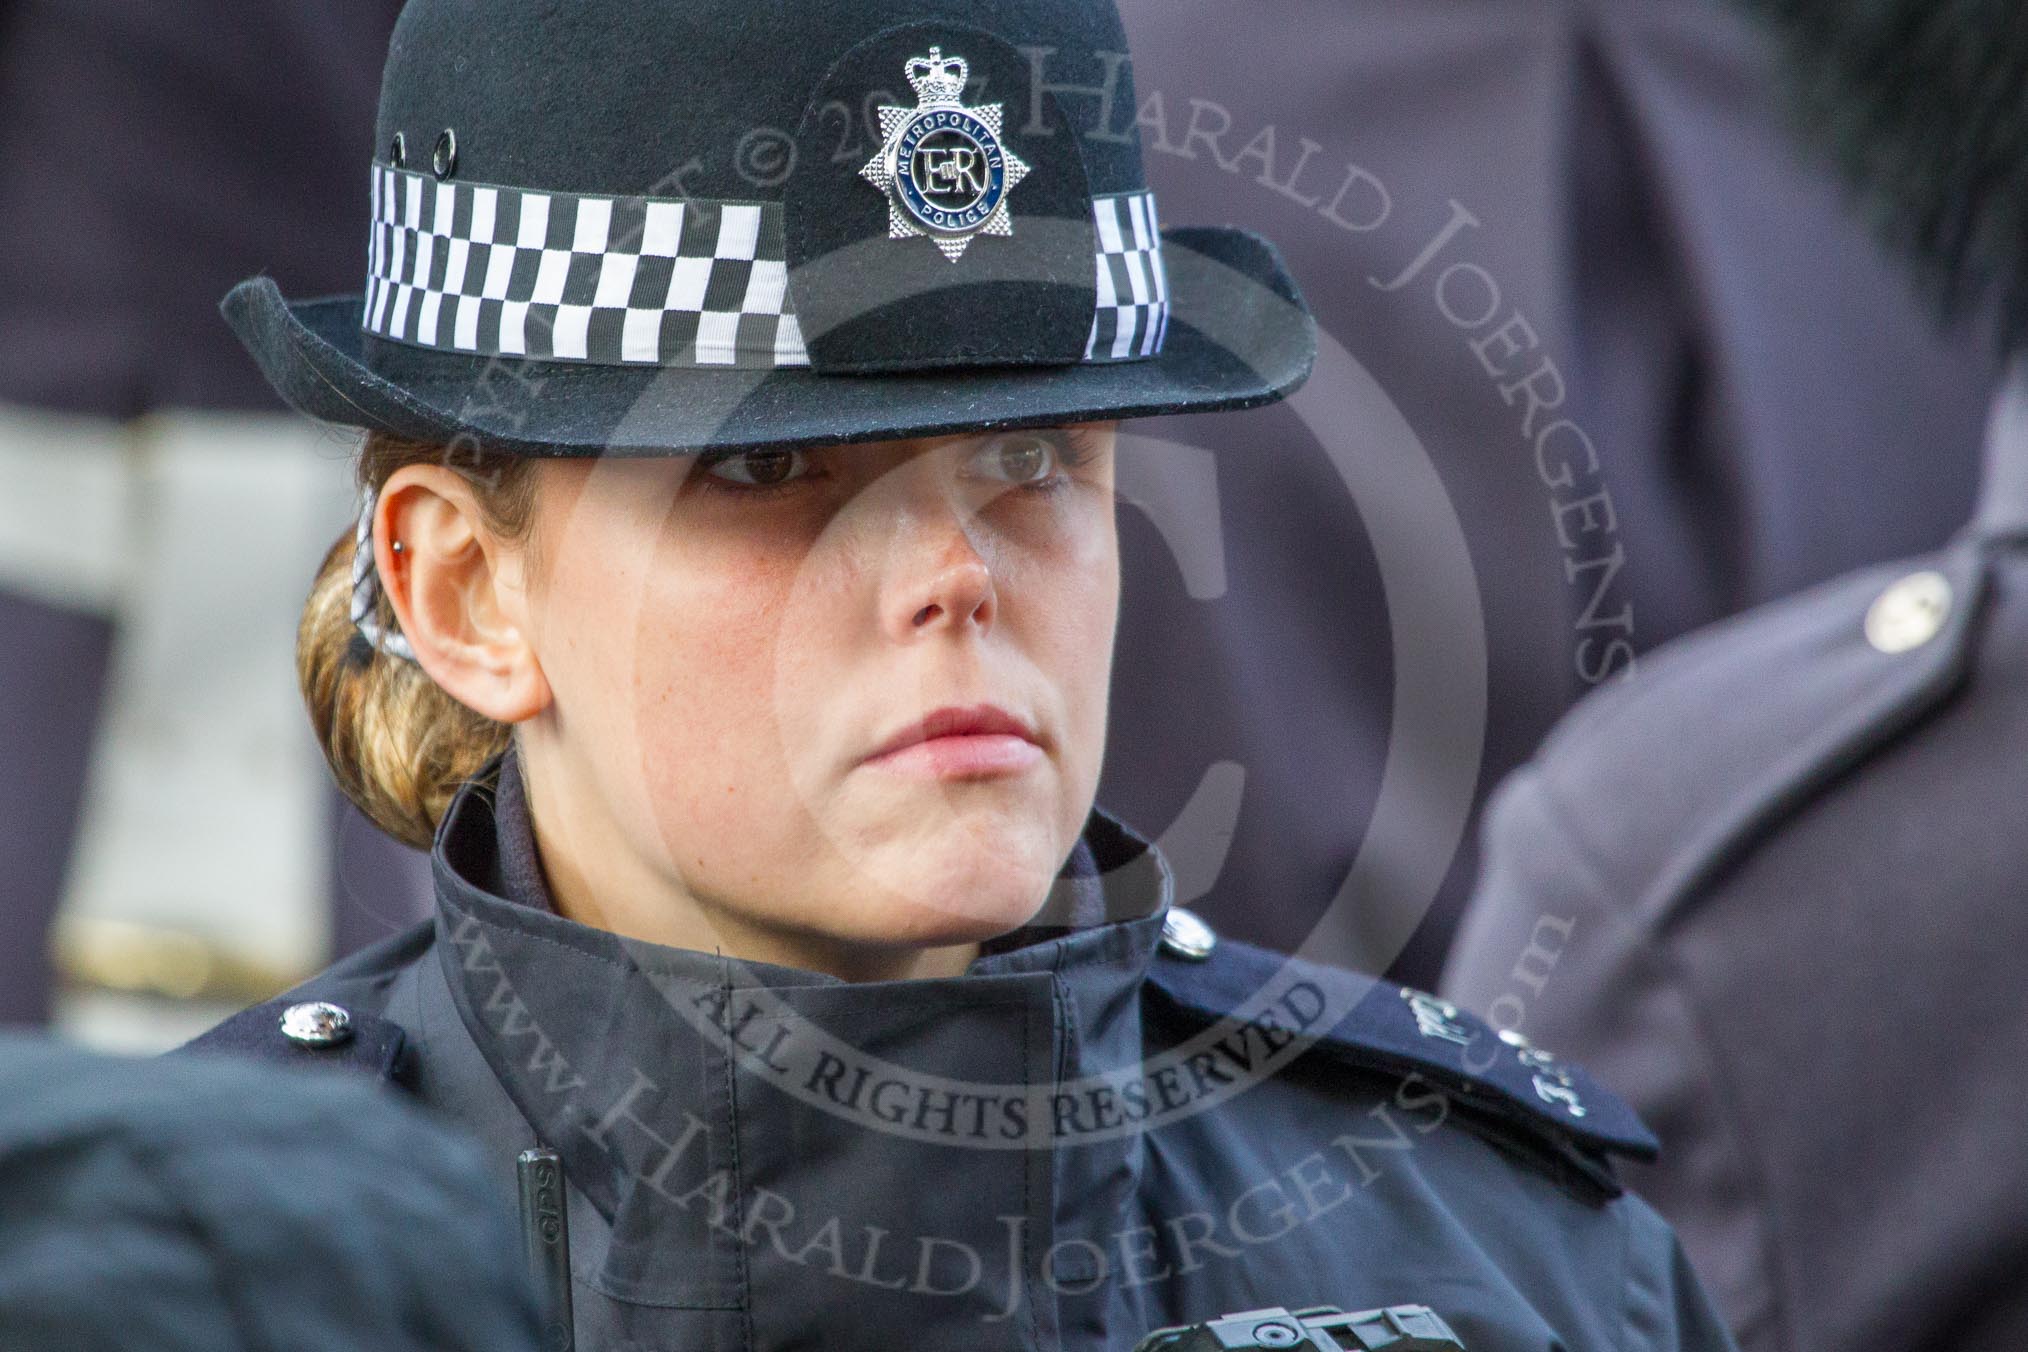 Metropolitan Police Constable Snell keeping an eye on the crowds before the Remembrance Sunday Cenotaph Ceremony 2018 at Horse Guards Parade, Westminster, London, 11 November 2018, 10:29.